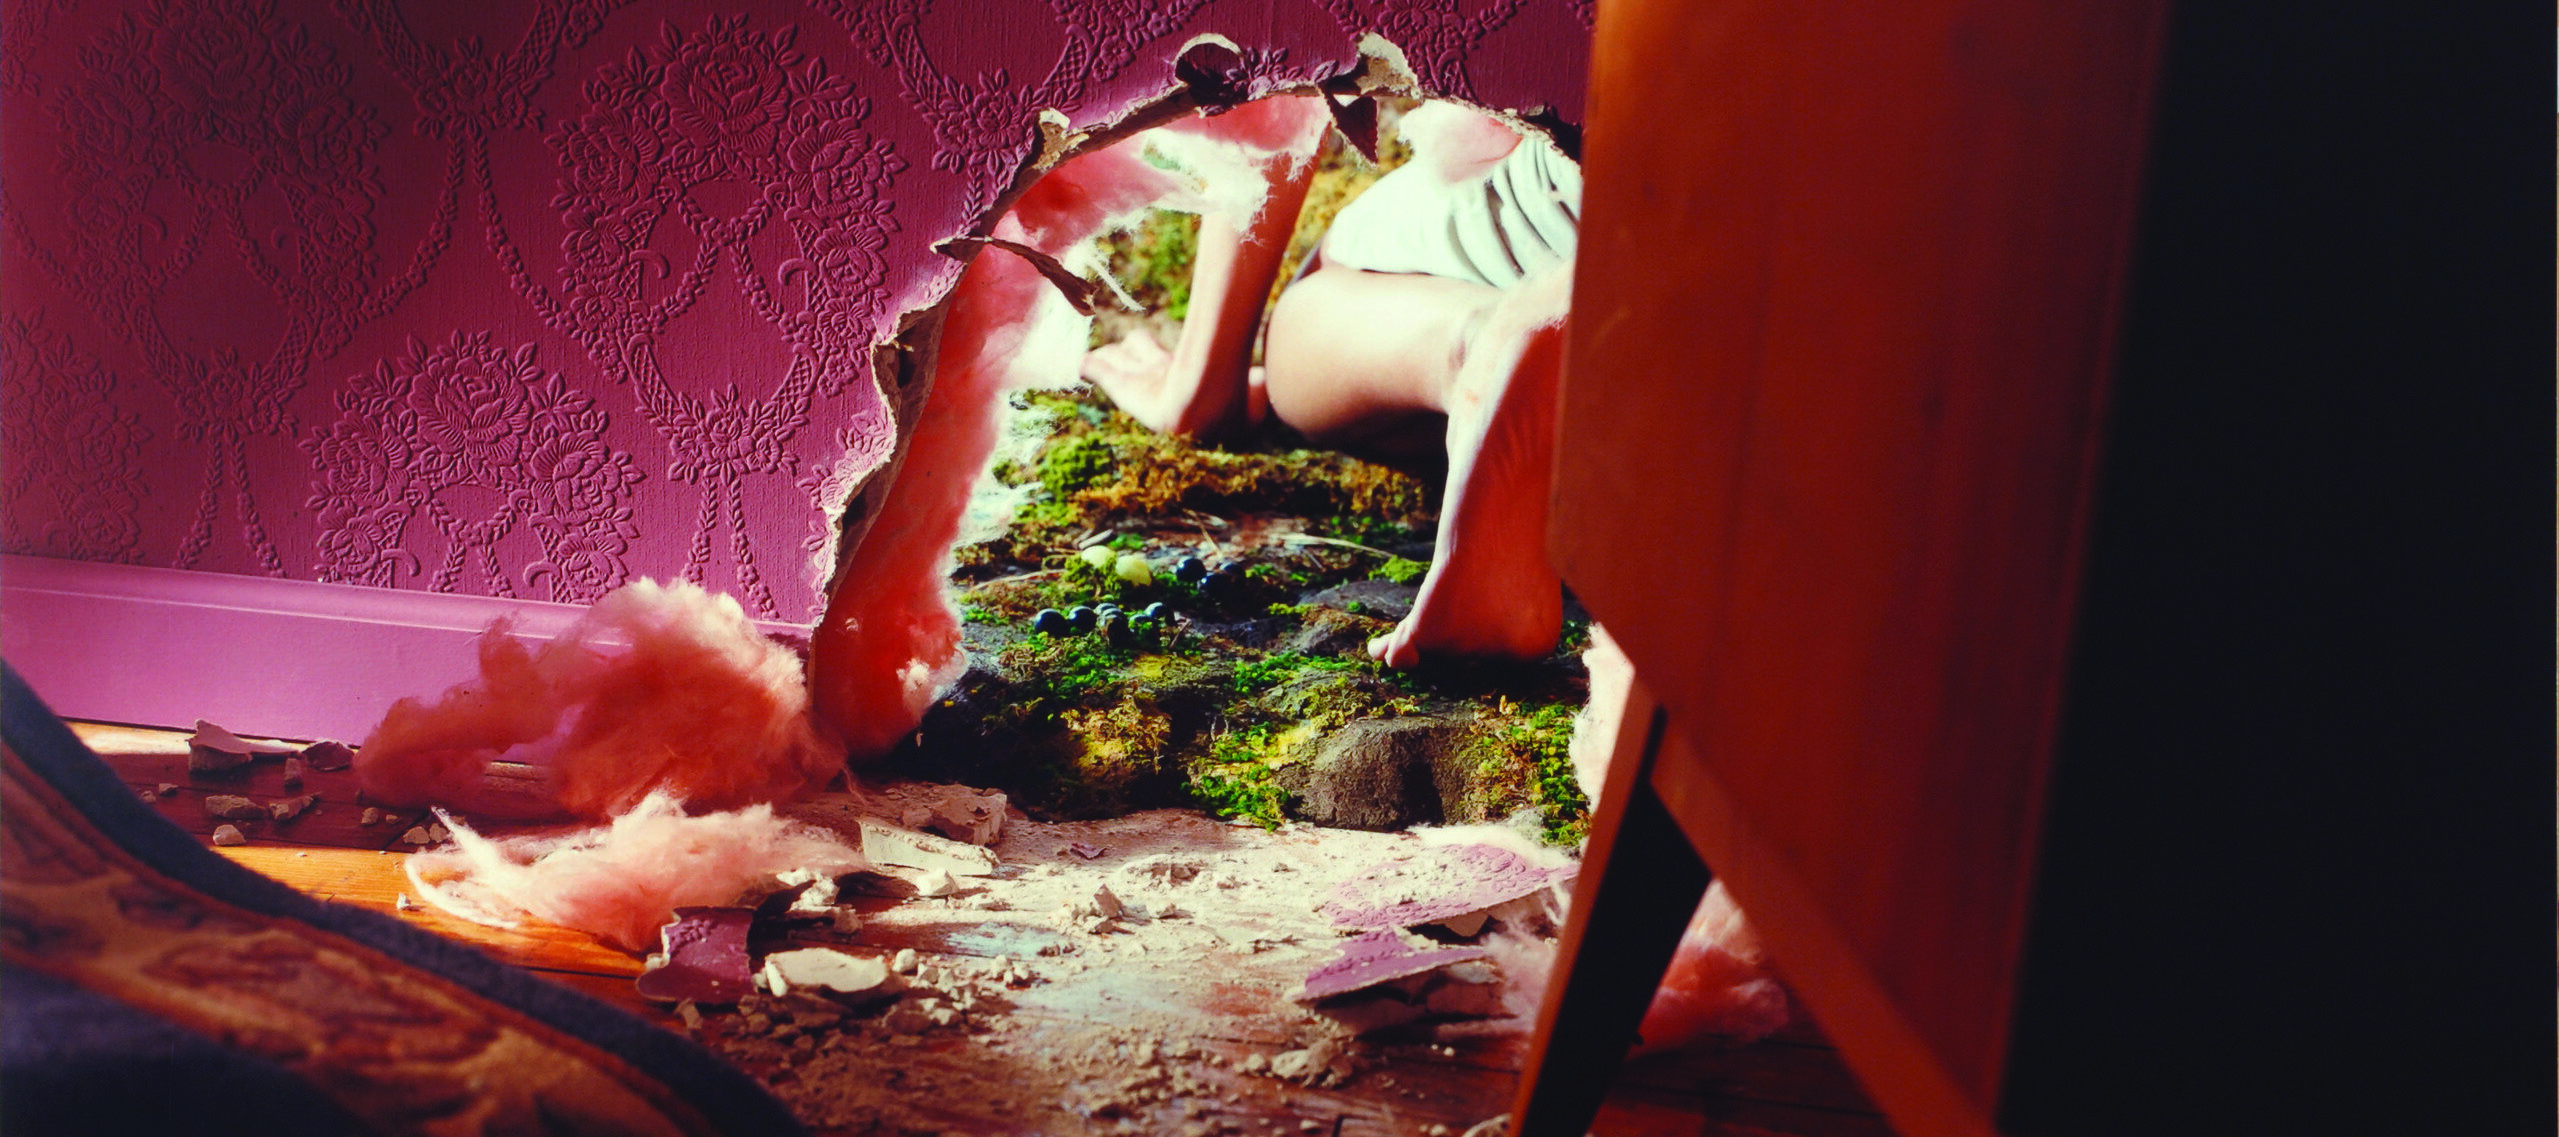 A pink wall and pink chair in a living room with a hole torn through the wall at the ground-level. A child crawls out and away from the hole into the grassy outdoors, leaving behind wall debris in the room. Only the child's left arm and leg are visible through the hole.